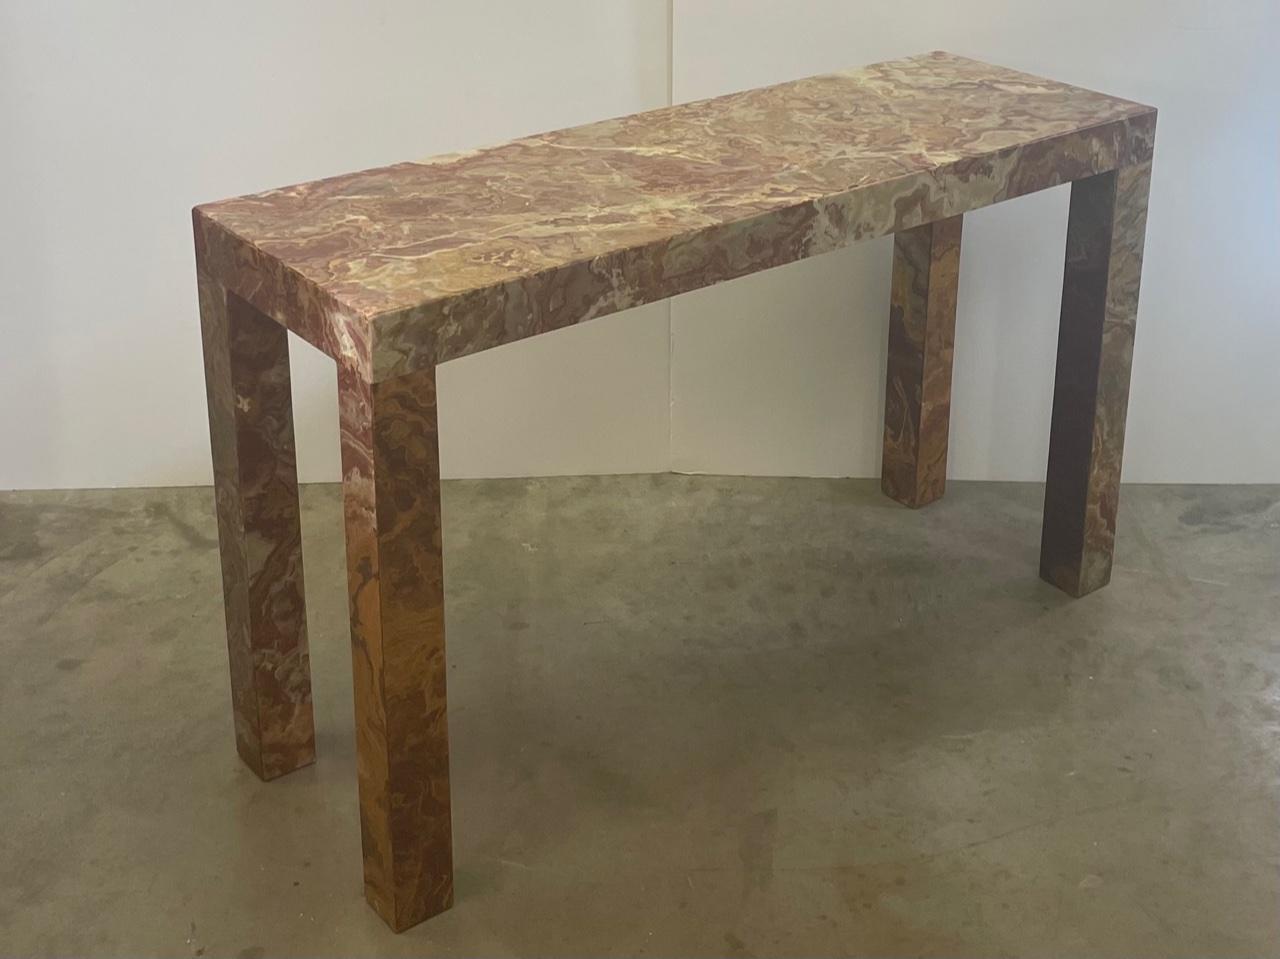 Superb Parsons style sleek Mid-Century Modern Italian console table made of gorgeous marble with lively grain. Each leg is 3